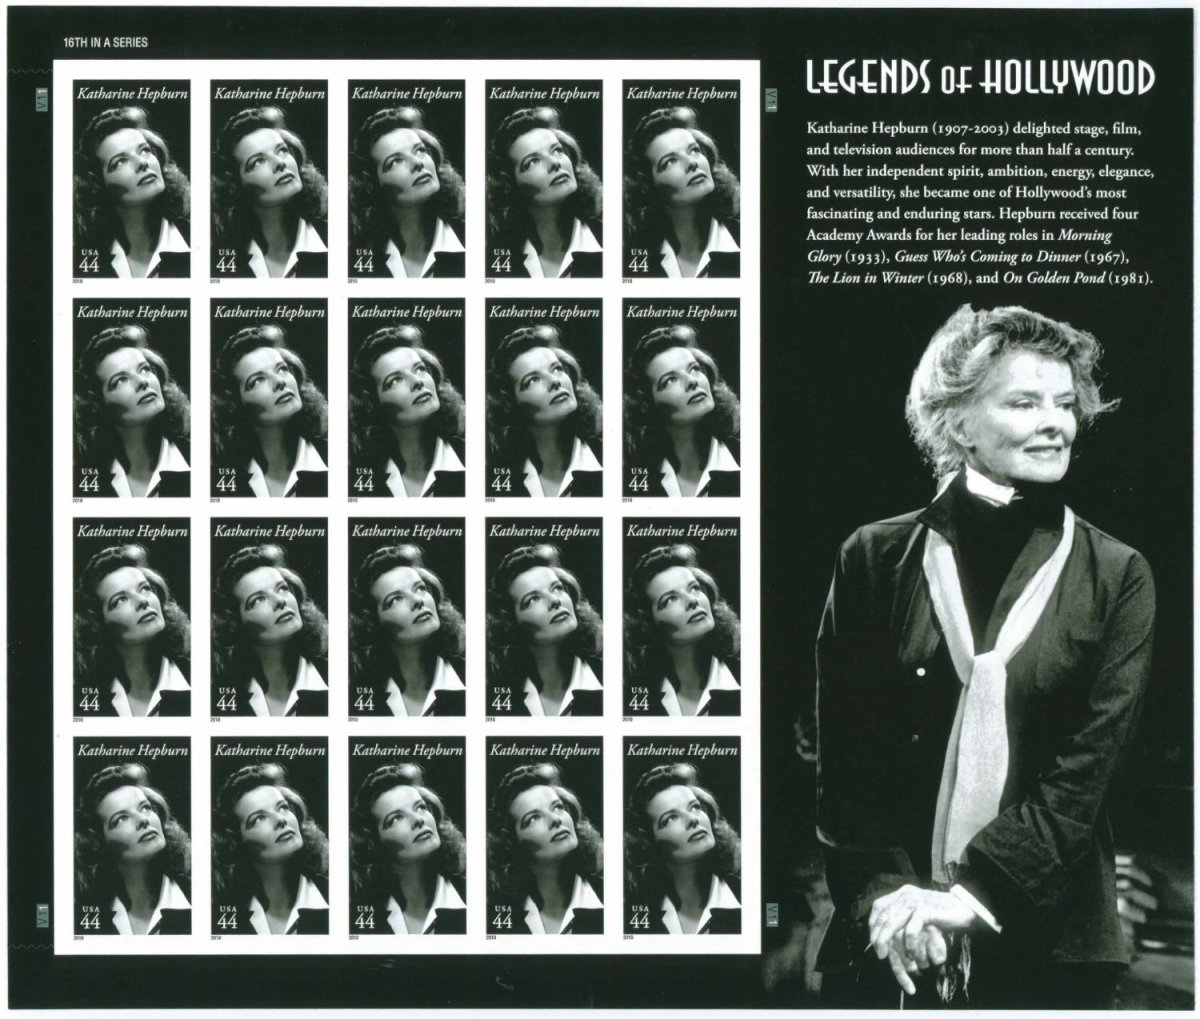 legends-of-hollywood-stamp-series